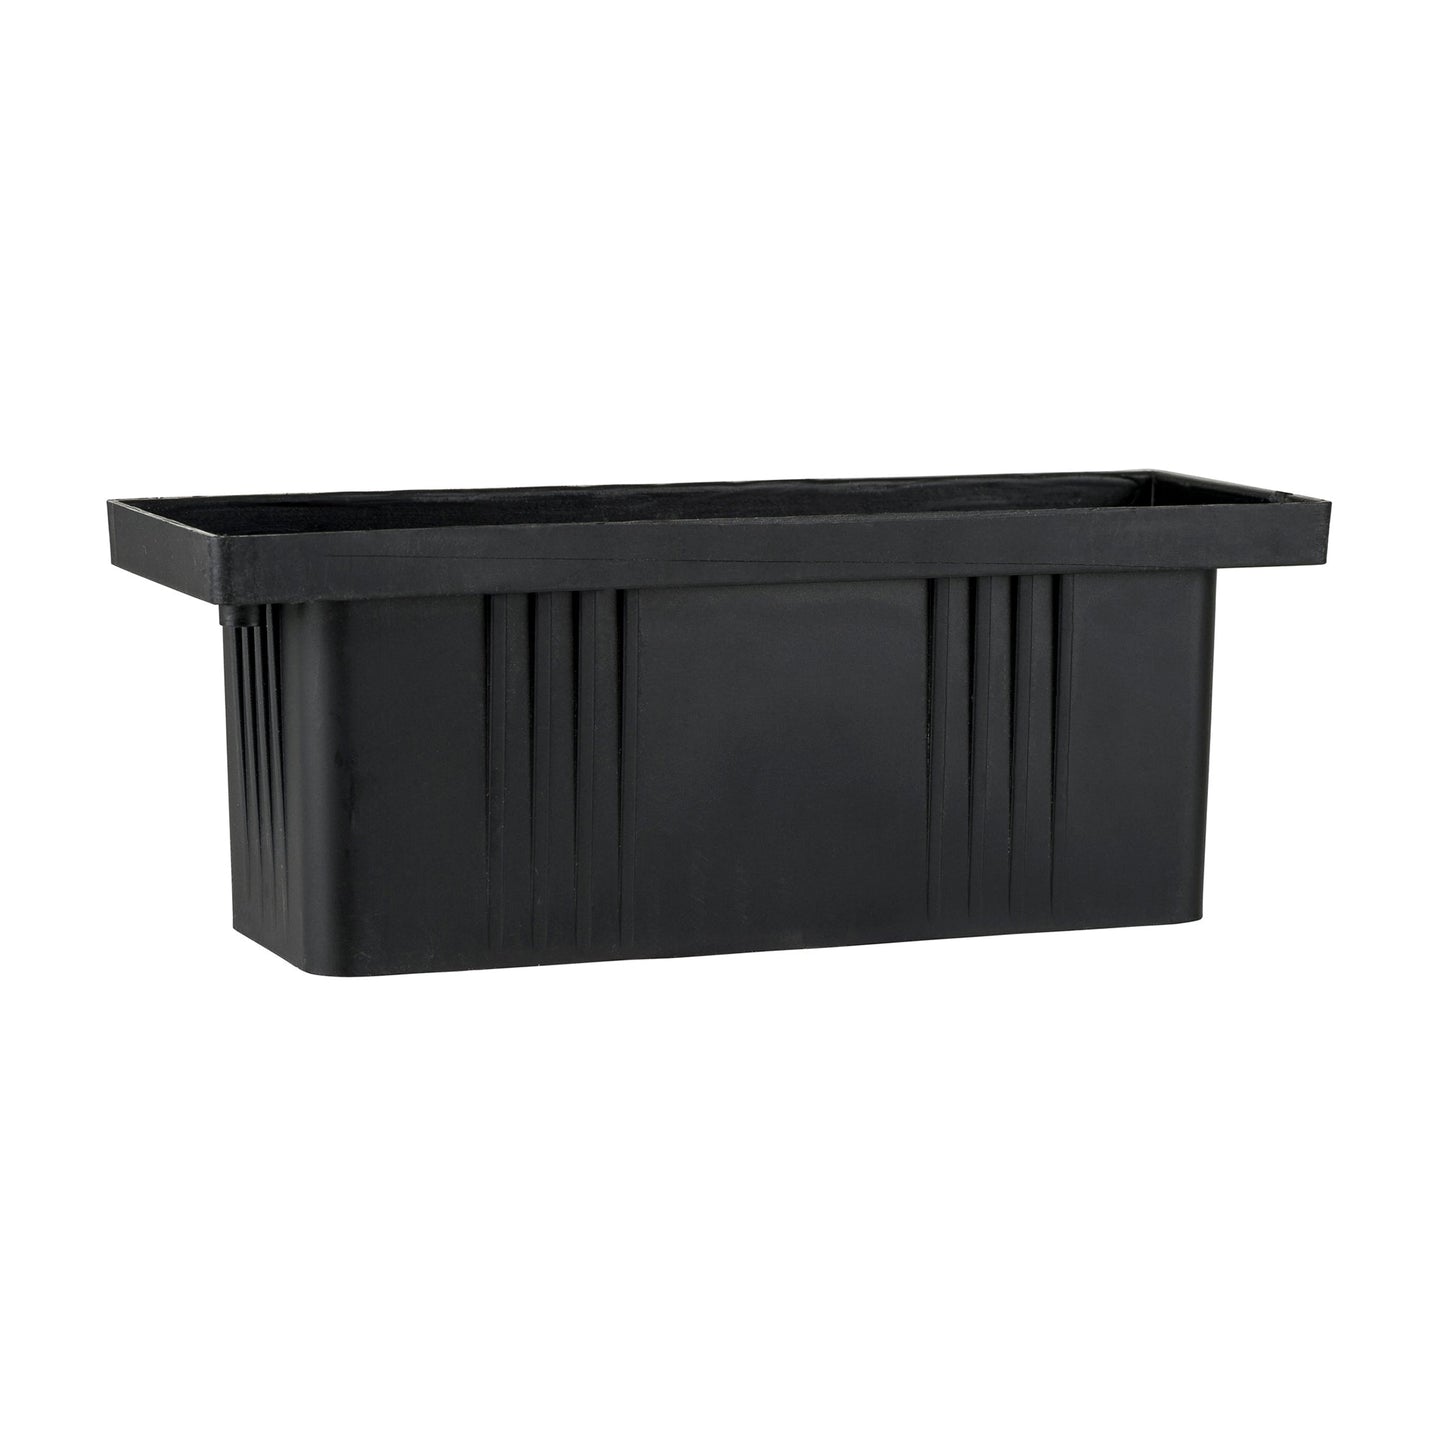 Recessed Brick Light With Black Grill Cover  HV3006t-Blk-12v